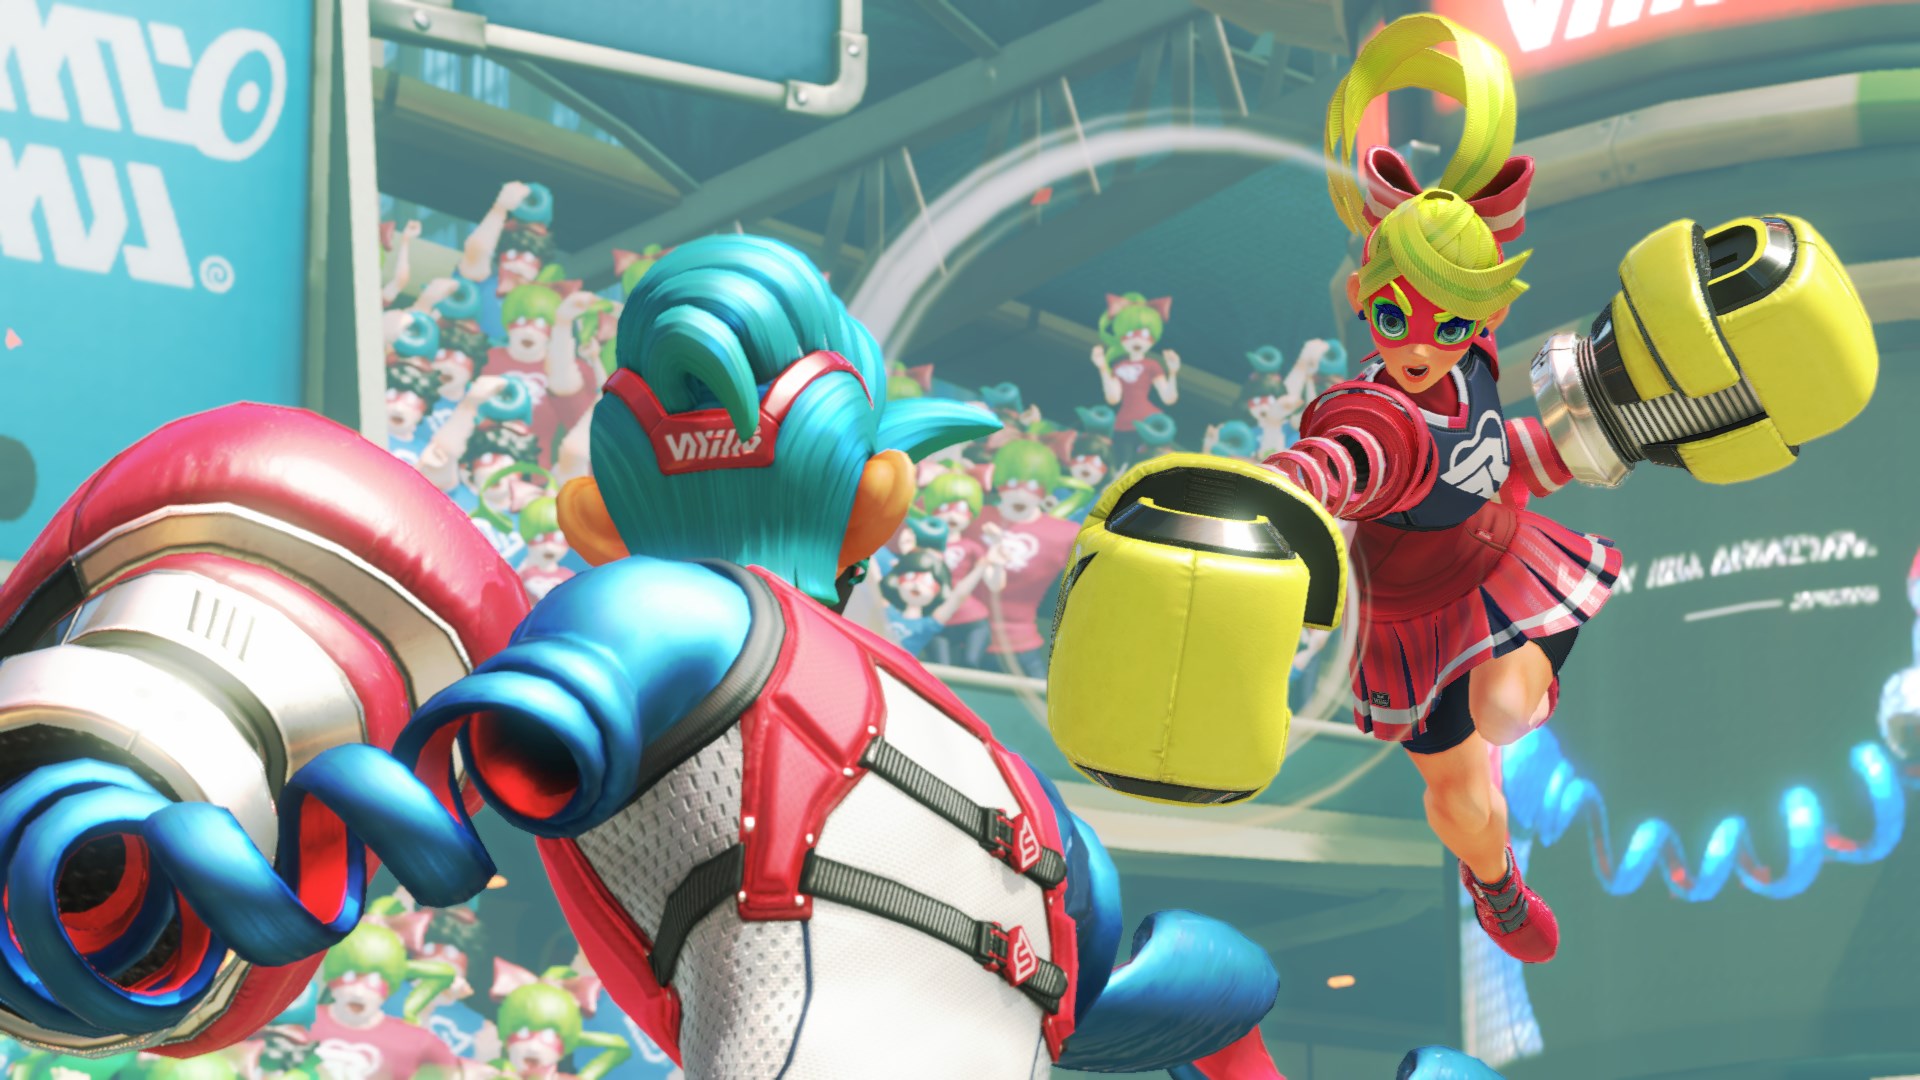 Video Game Arms HD Wallpaper | Background Image